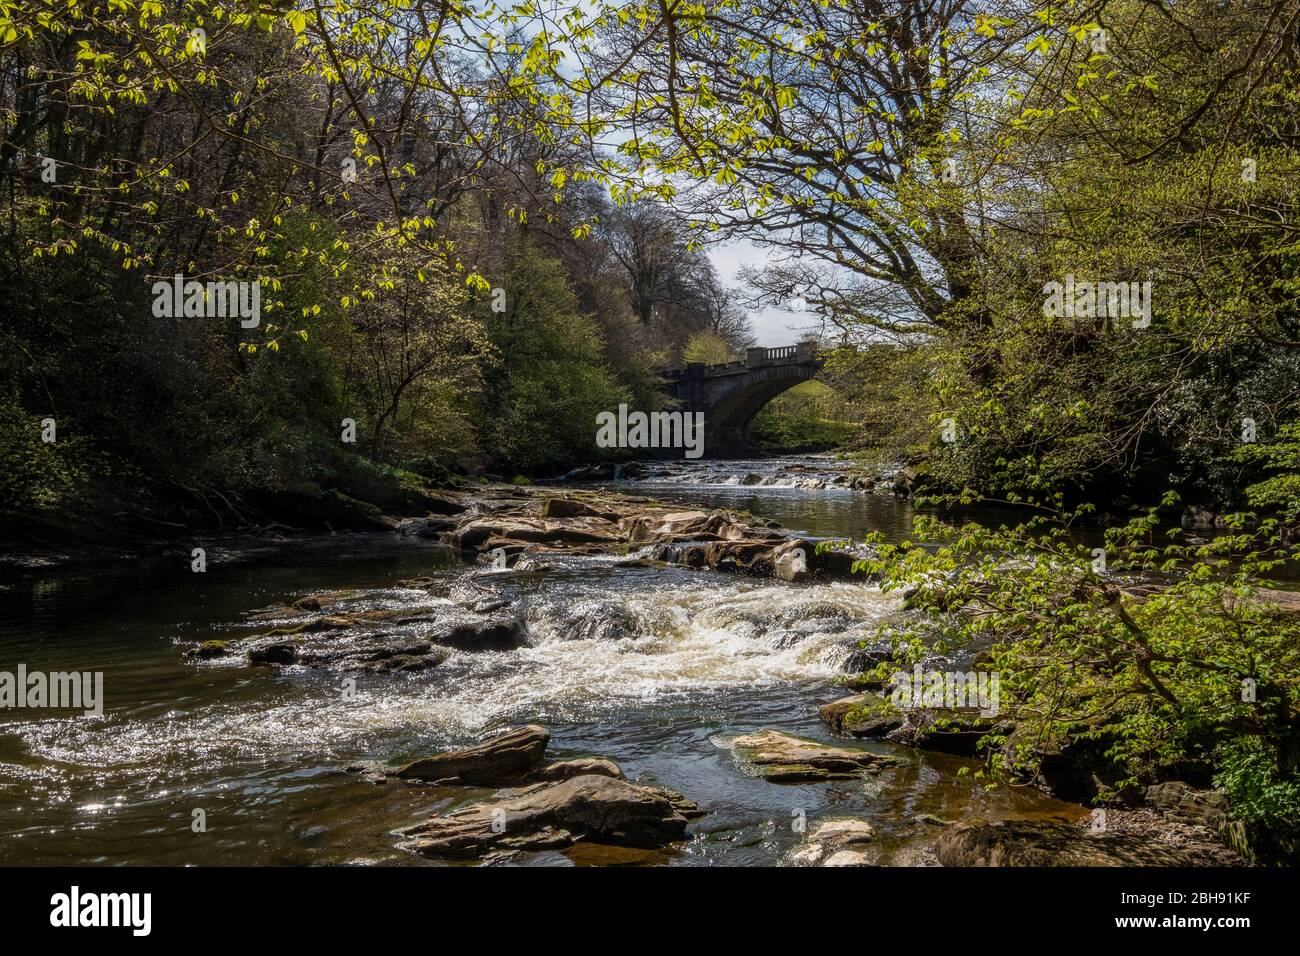 The River Almond and Naismith Bridge, Almondell Country Park, West Lothian, Schottland. Stockfoto